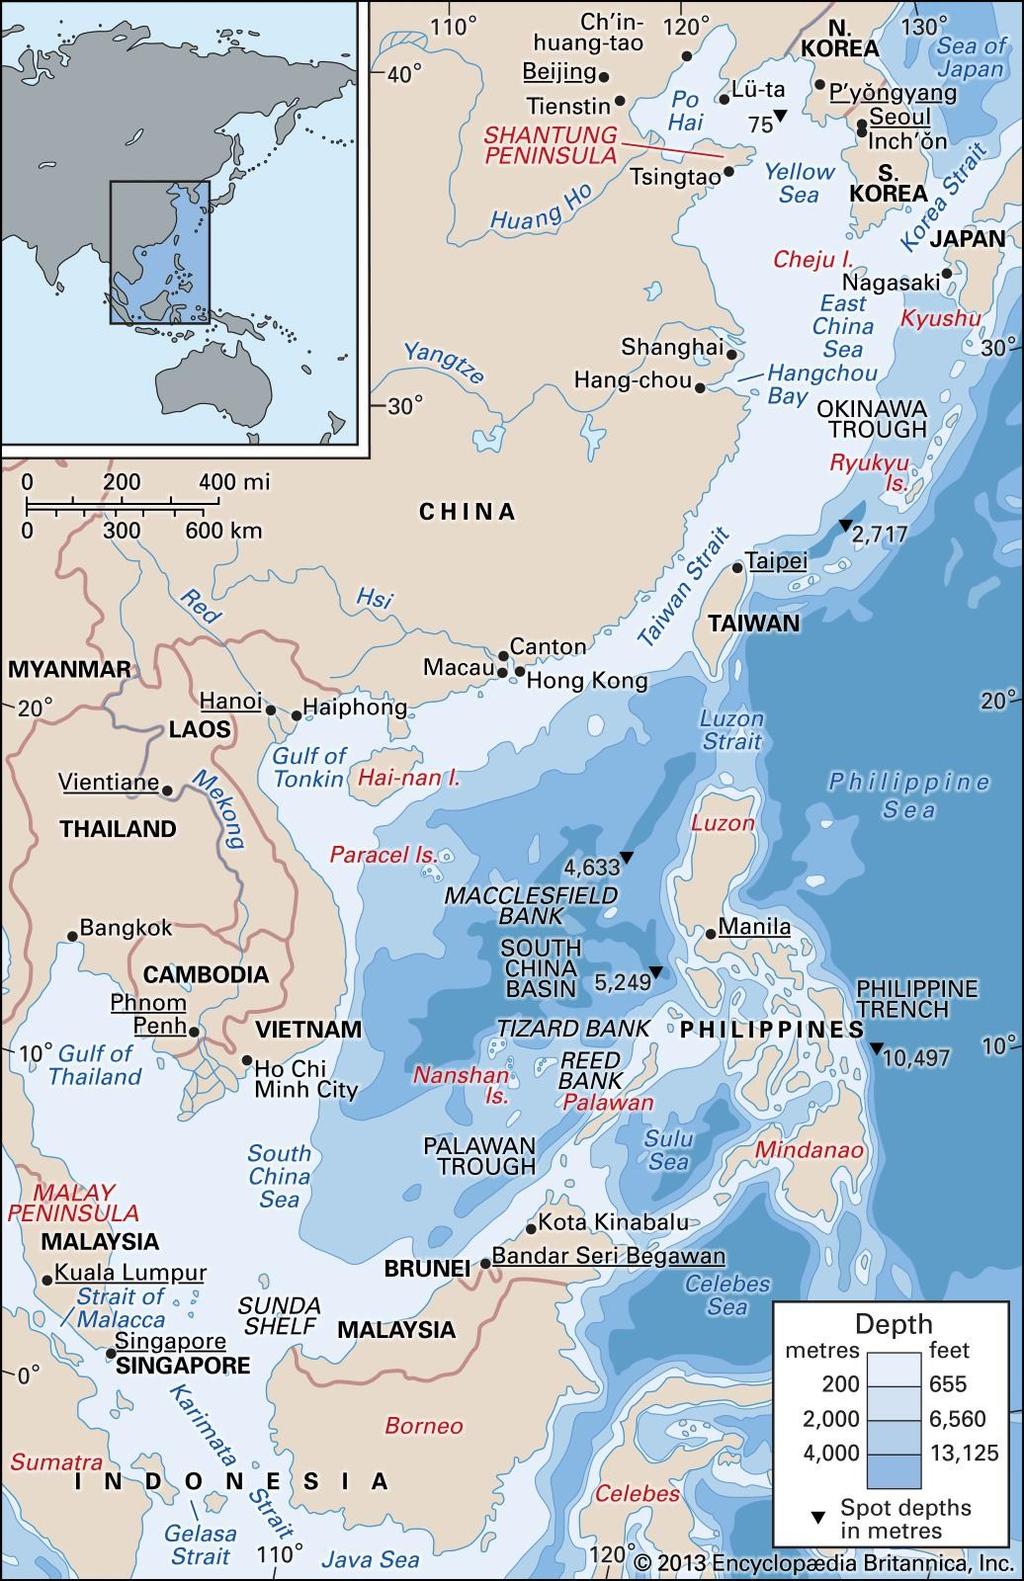 Figure 7: Water depth map of the South China Sea